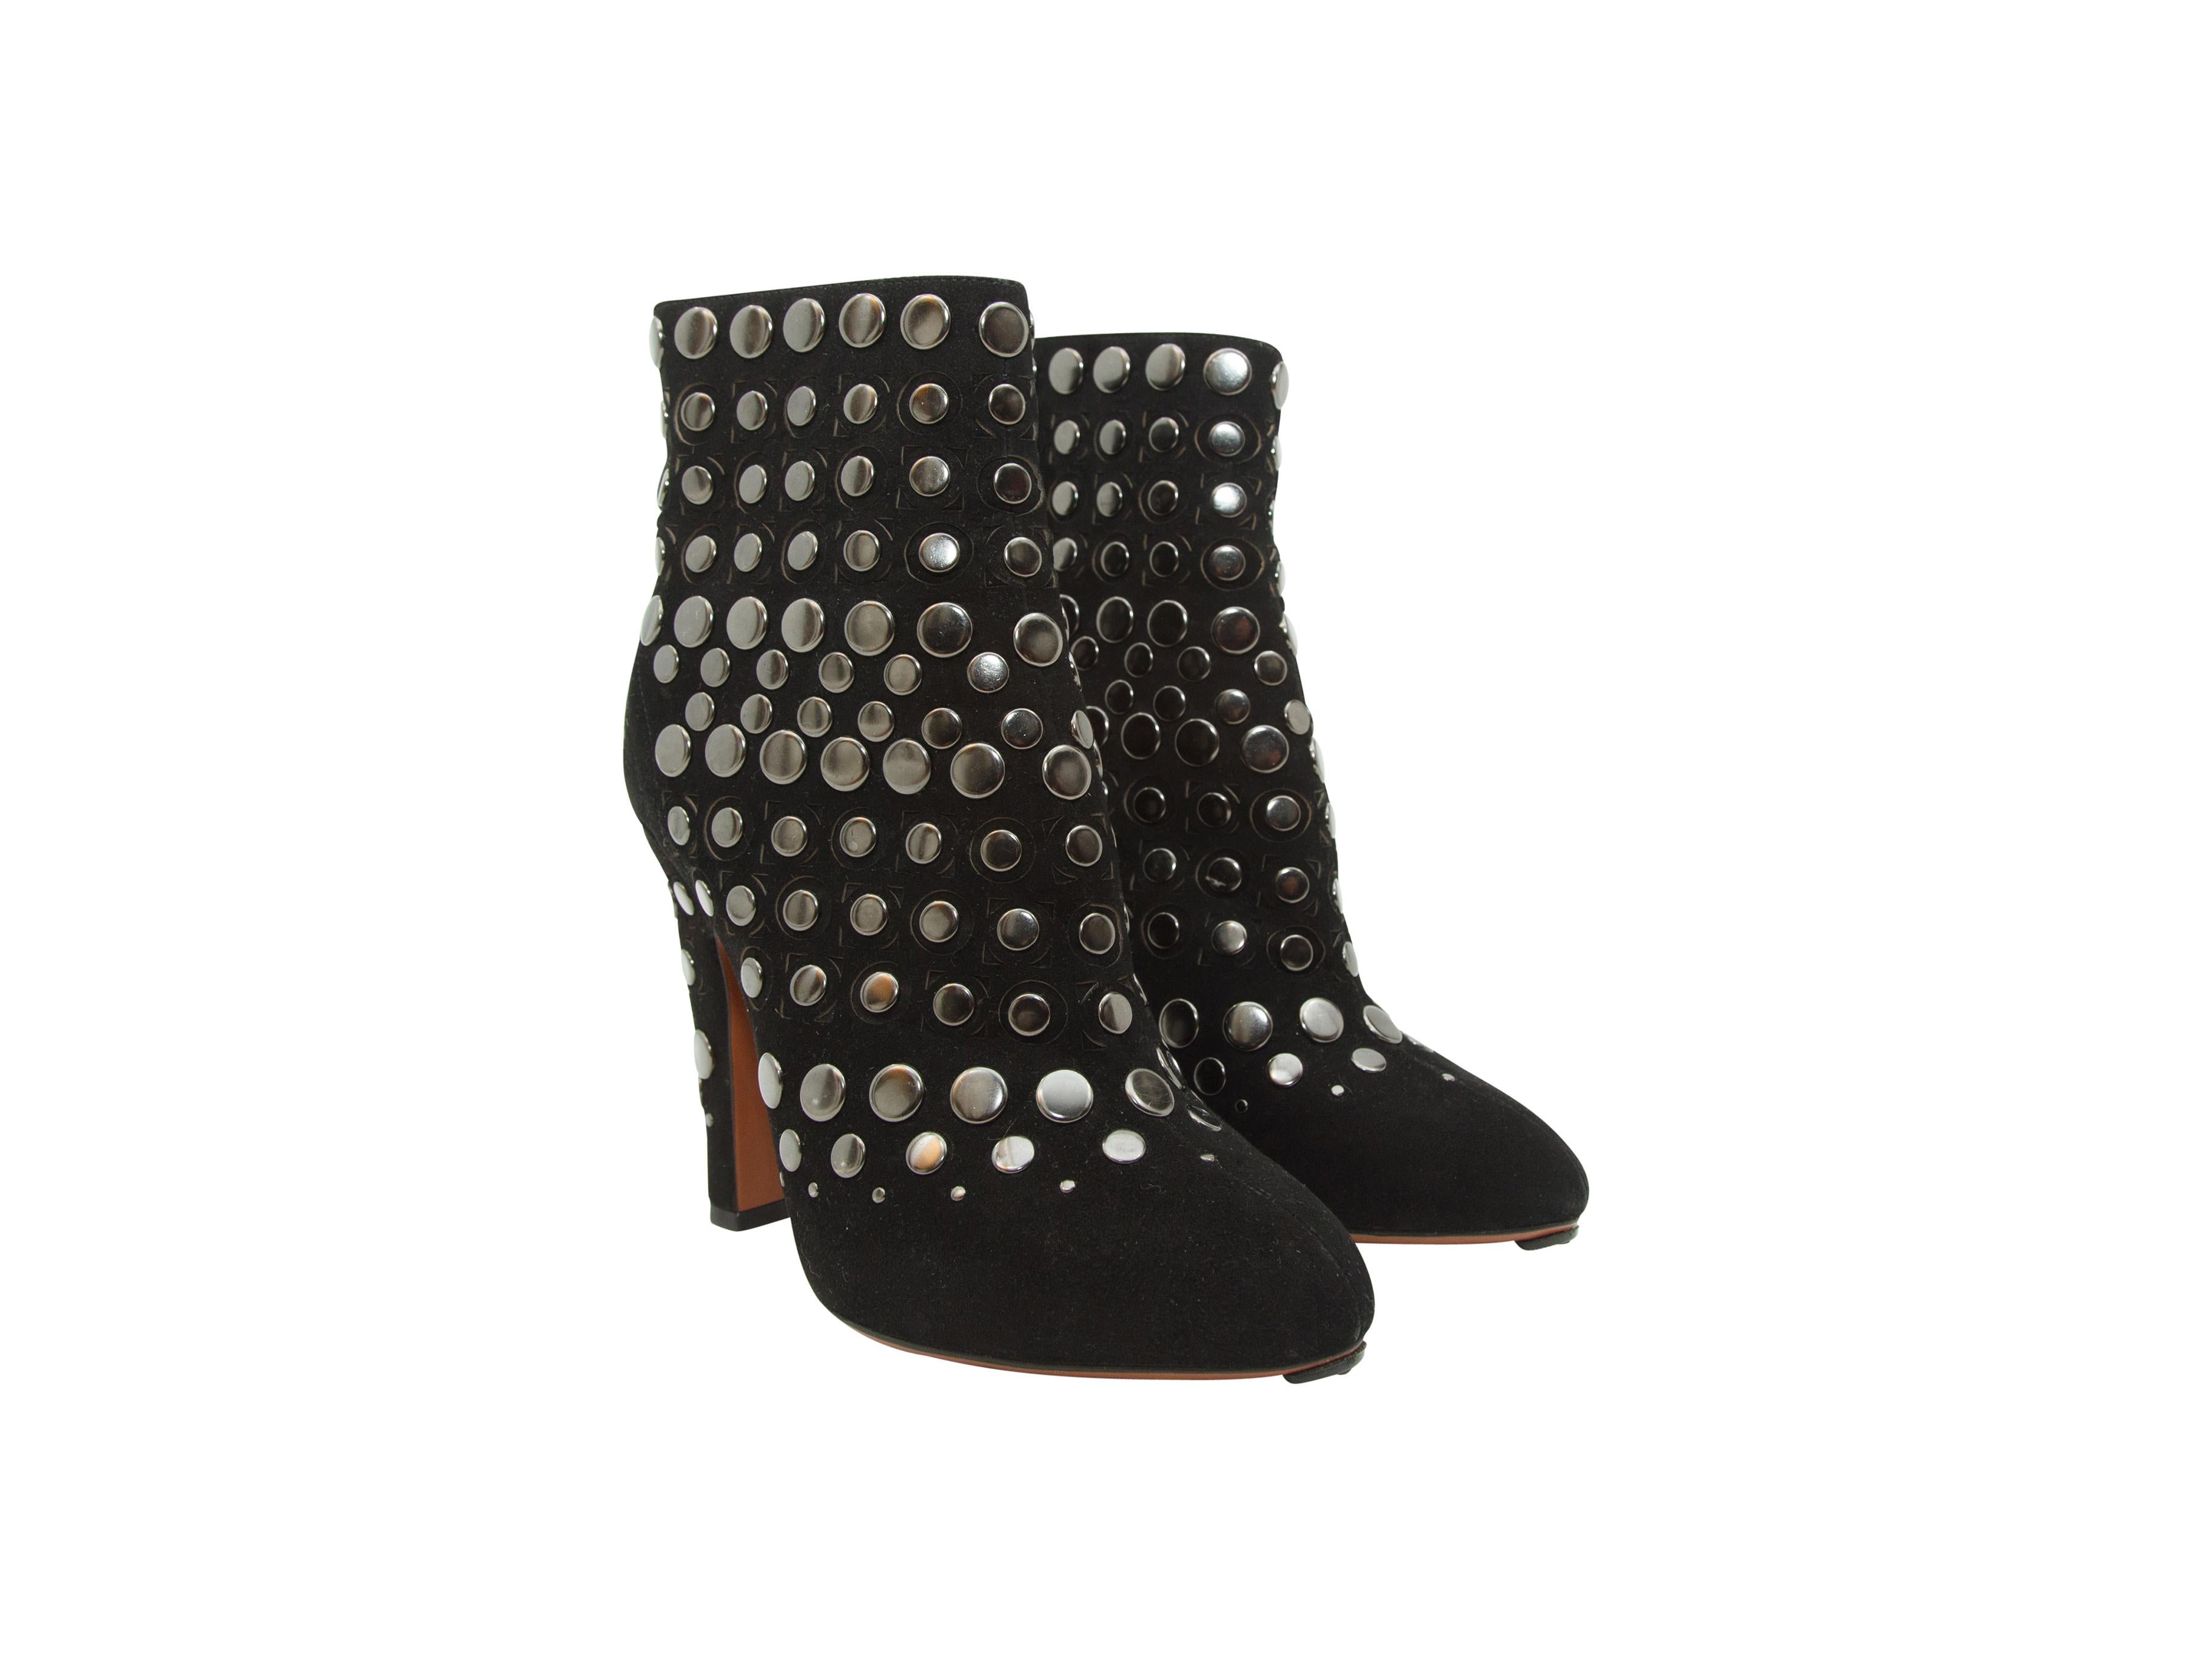 Product details:  Black studded suede ankle boots by Alaia.  Rounded almond toe.  Back zip closure.  Silvertone hardware.  4.5